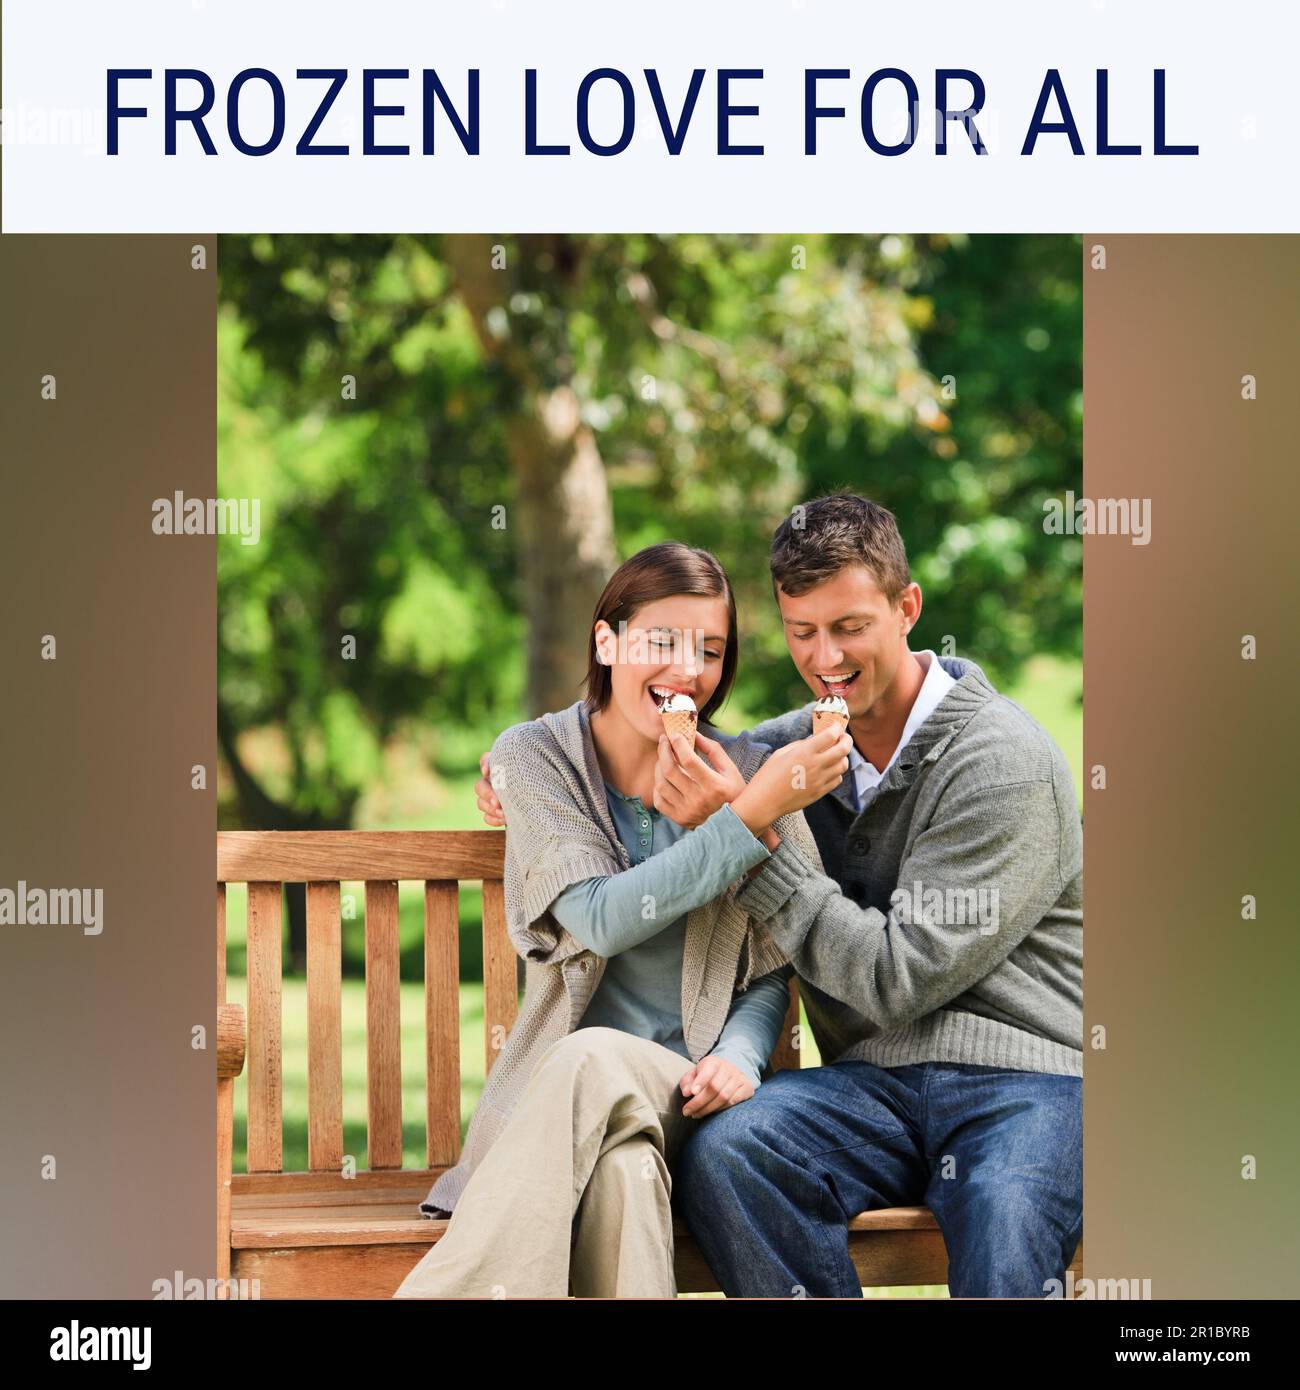 Composition of happy ice cream day text over caucasian couple eating ice cream Stock Photo